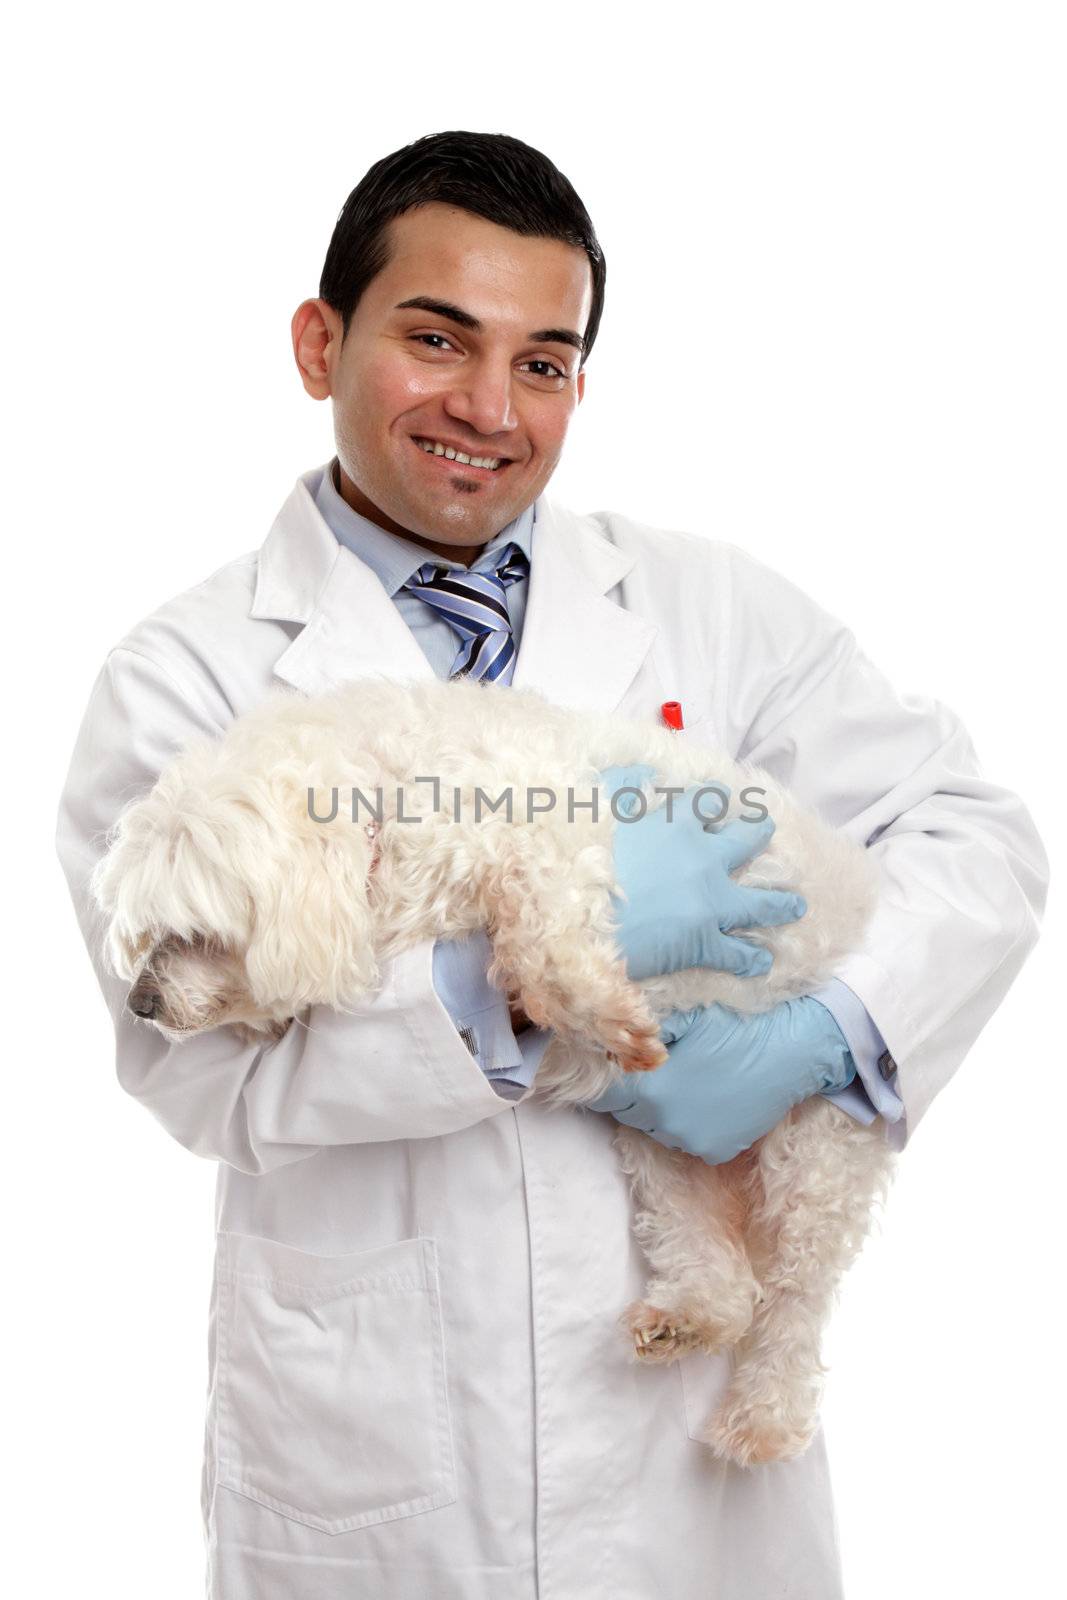 Smiling veterinarian carrying a pet dog in his arms.  White background.